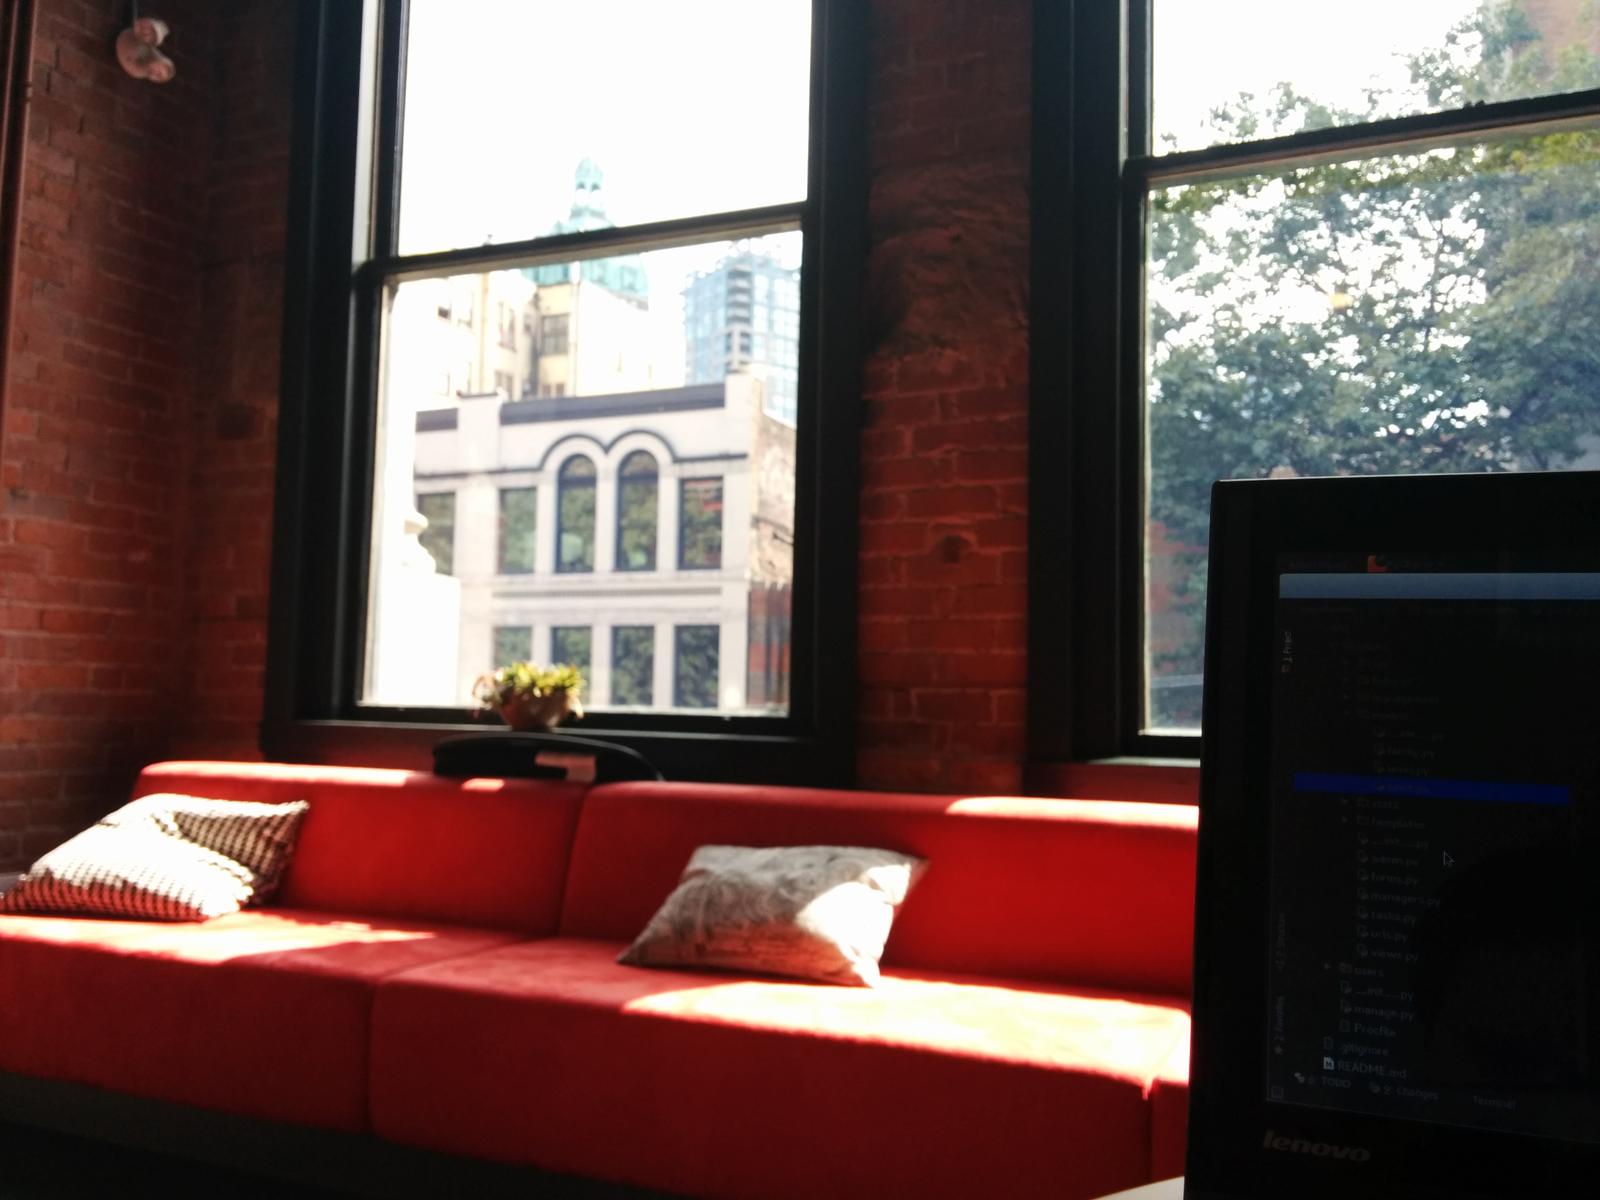 Thew view from inside the Mozilla office